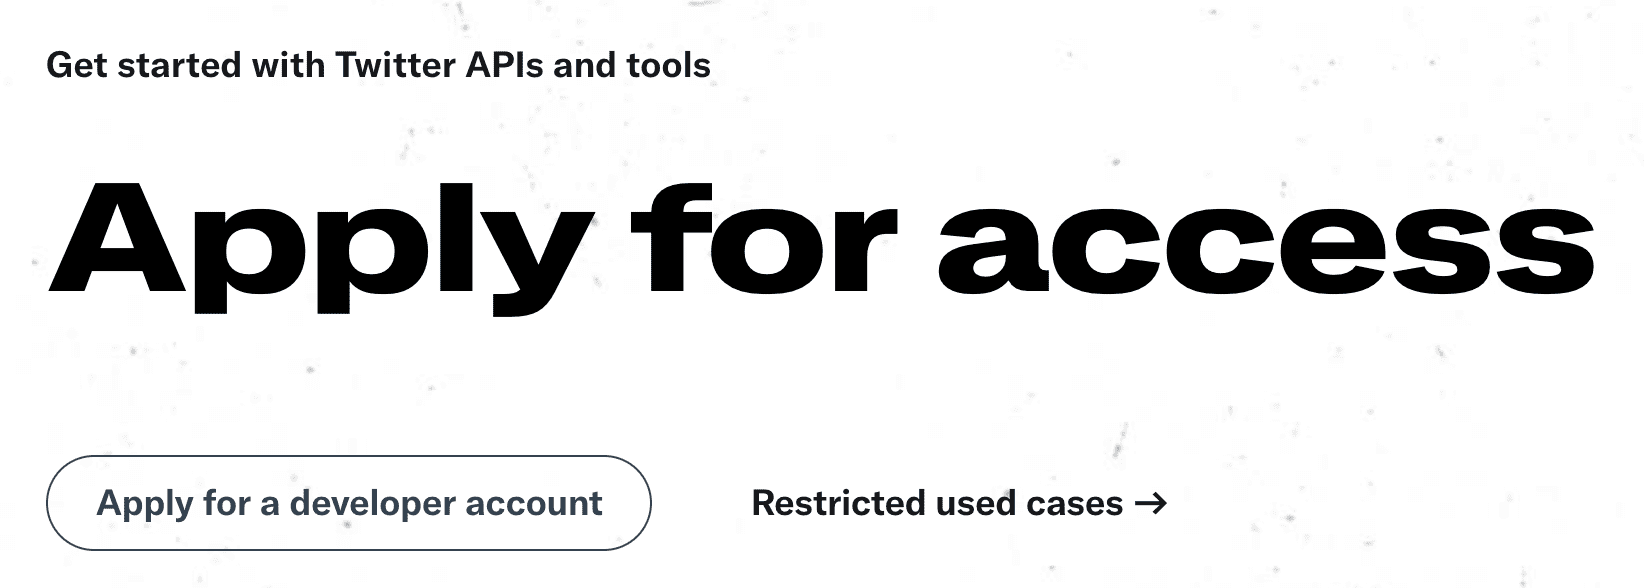 Twitter API: Apply for access